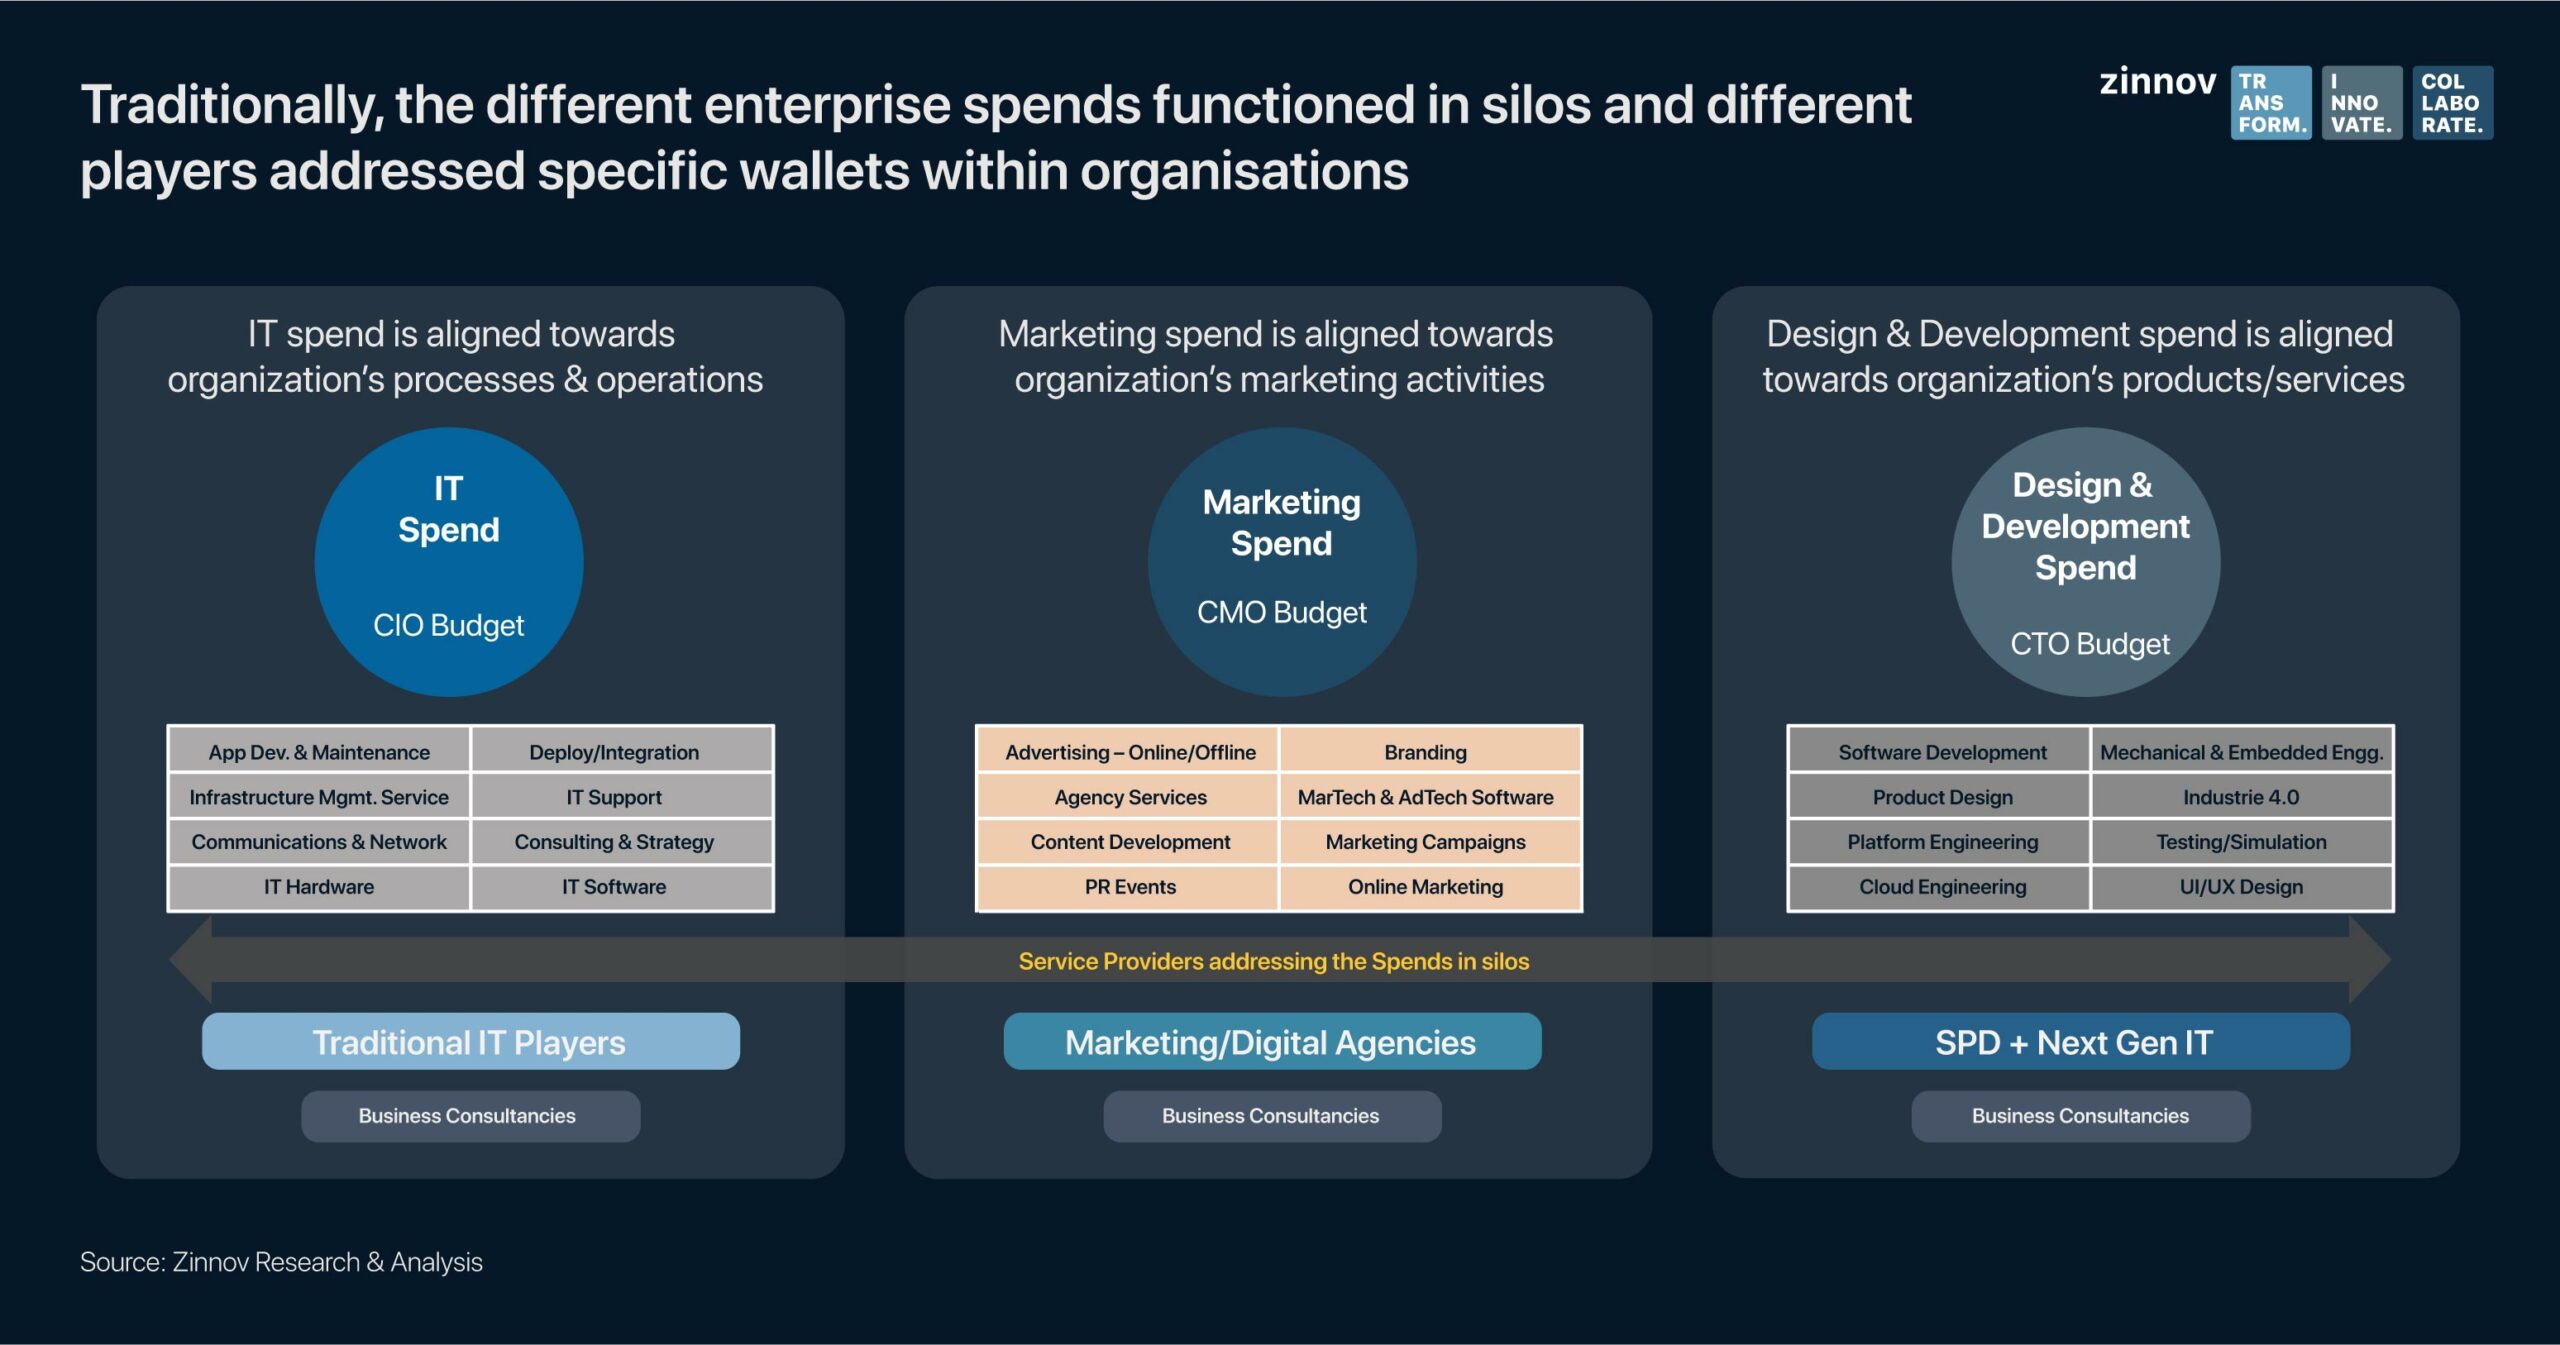 Different enterprise spends functioned in silos